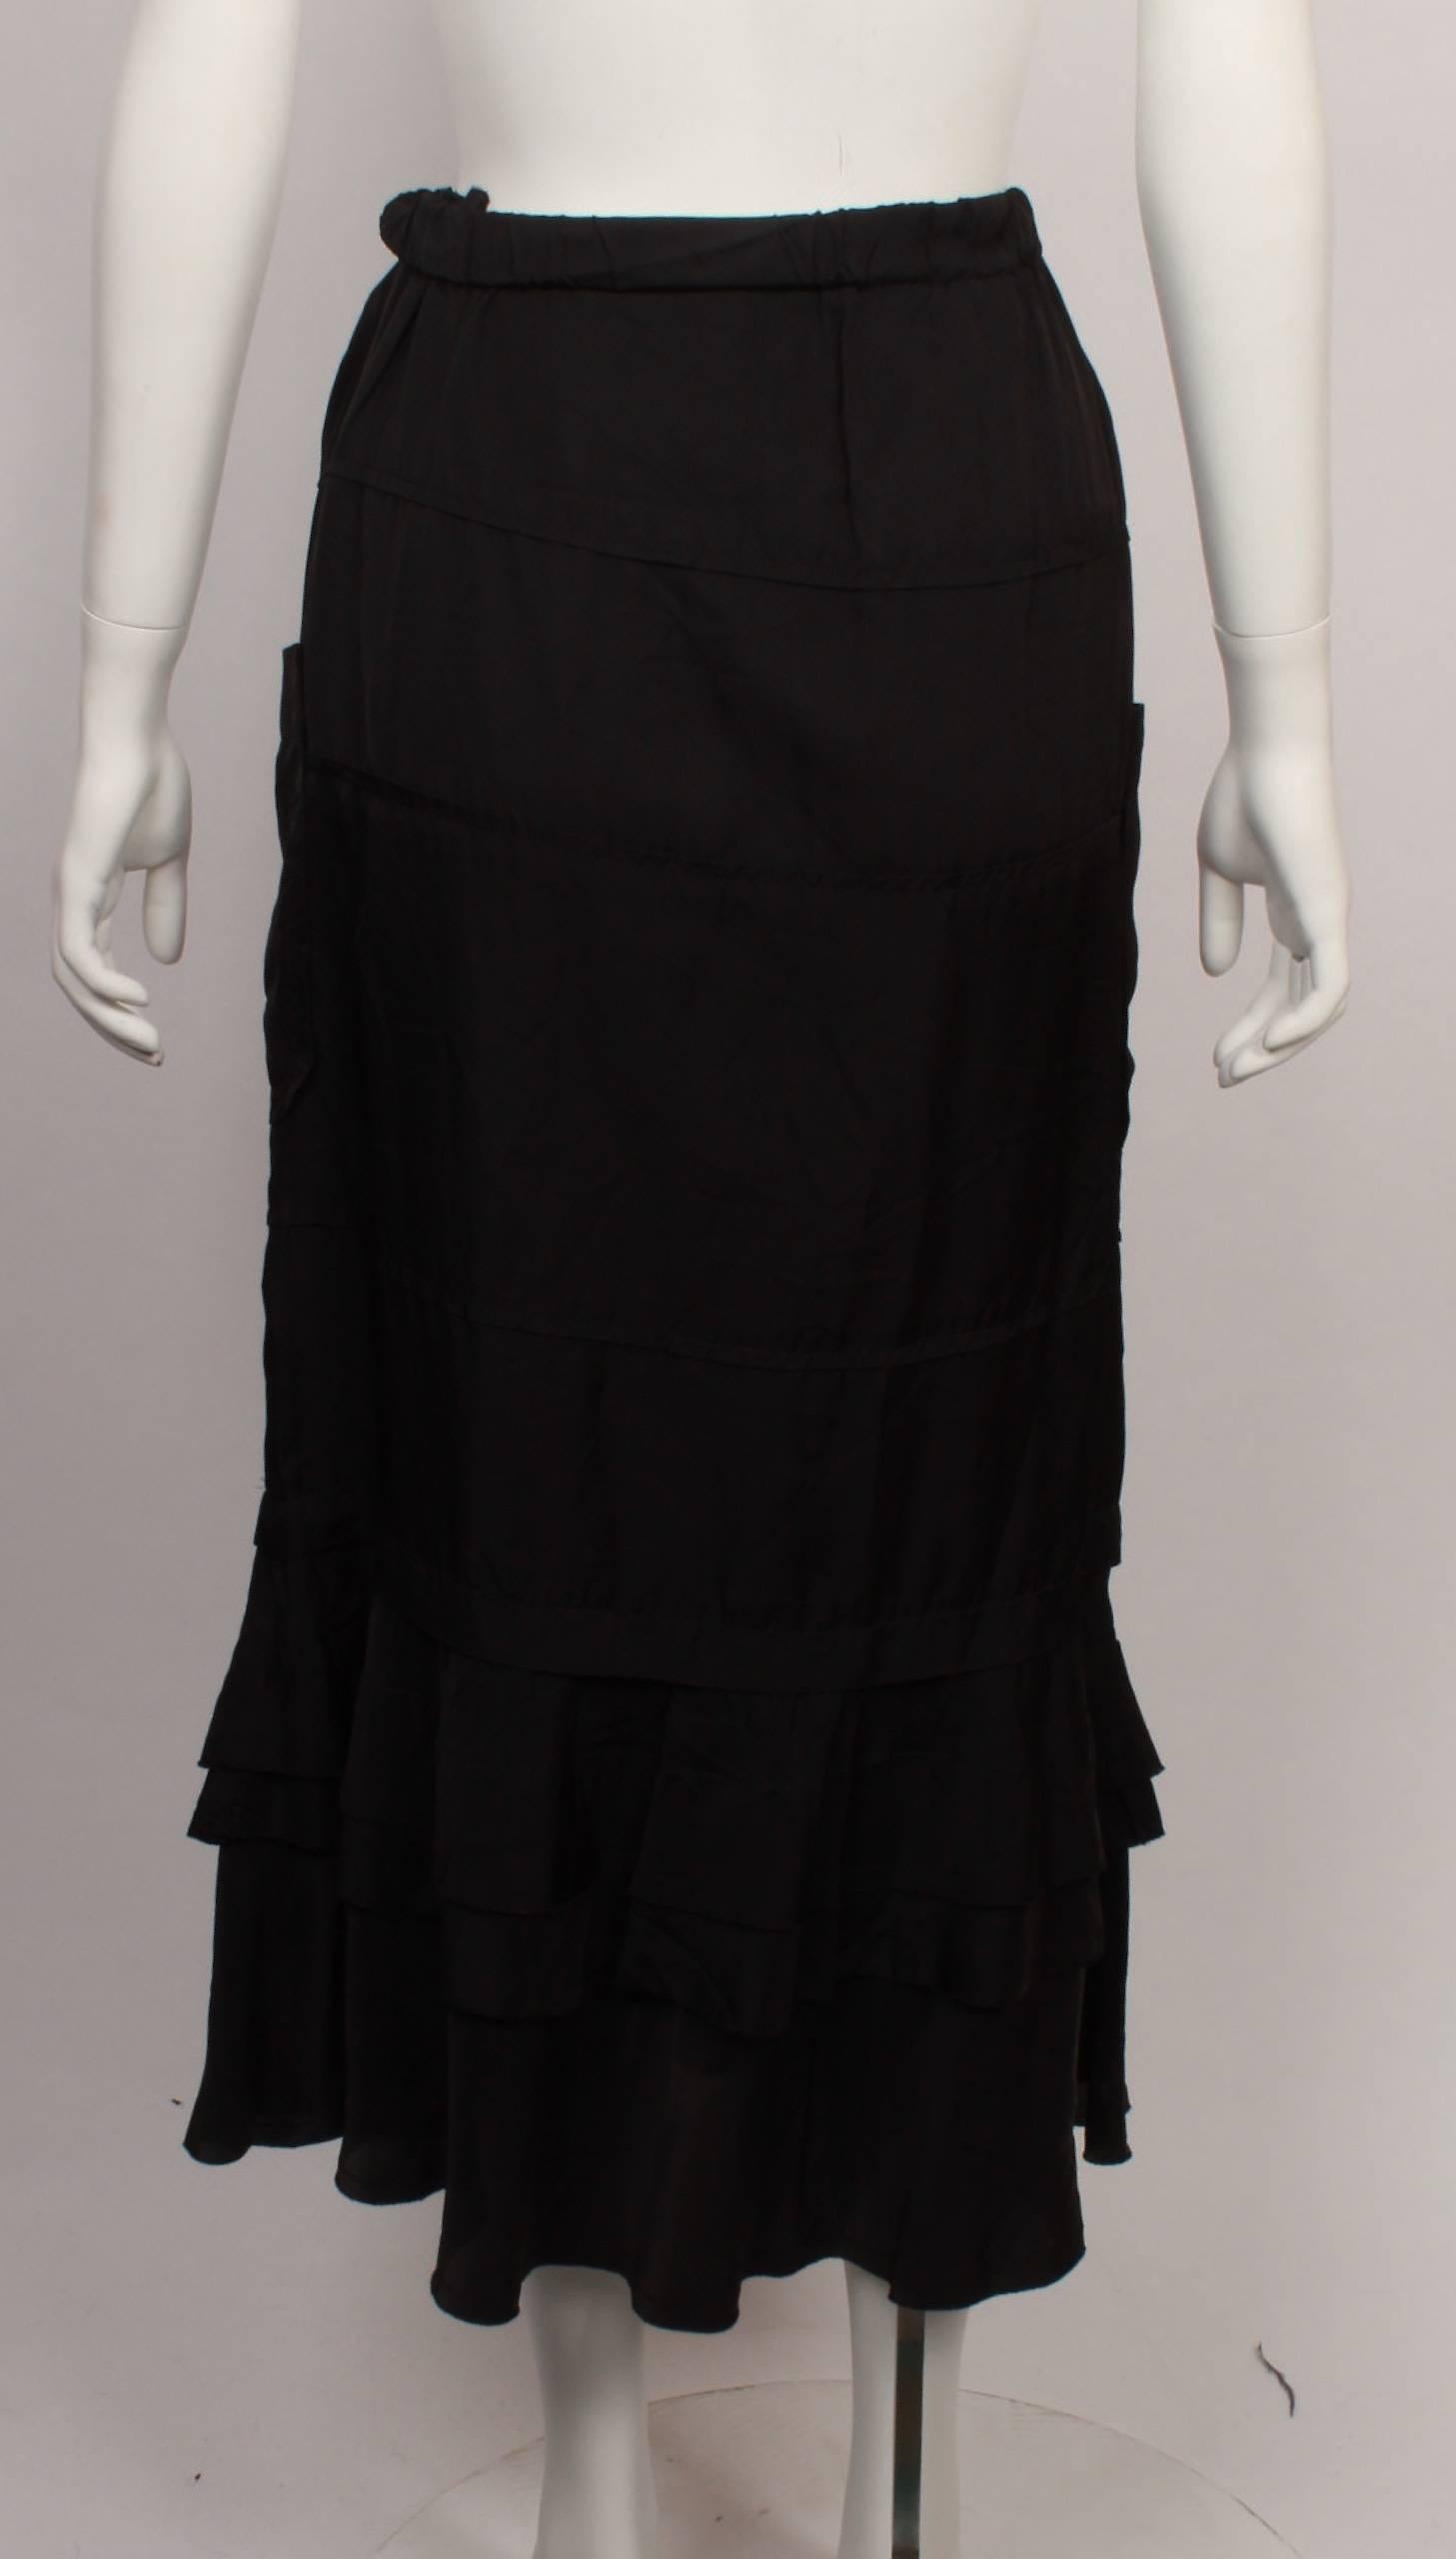 Comme des Garcons Tricot Black Skirt In Good Condition For Sale In Melbourne, Victoria